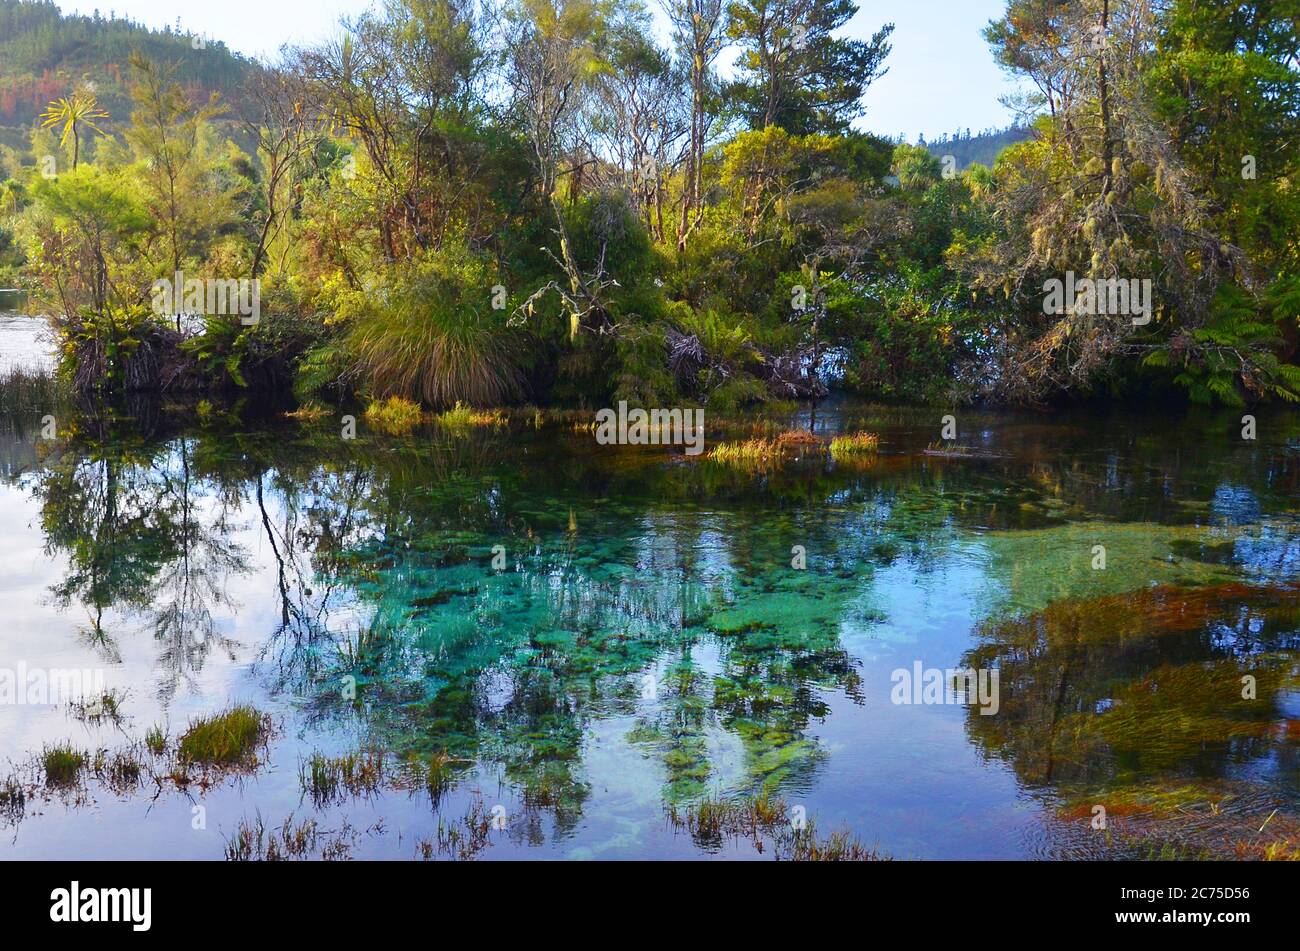 The Pupu Spring (Te Waikoropupu springs) in Golden Bay are home to the clearest springwater in the world. Stock Photo